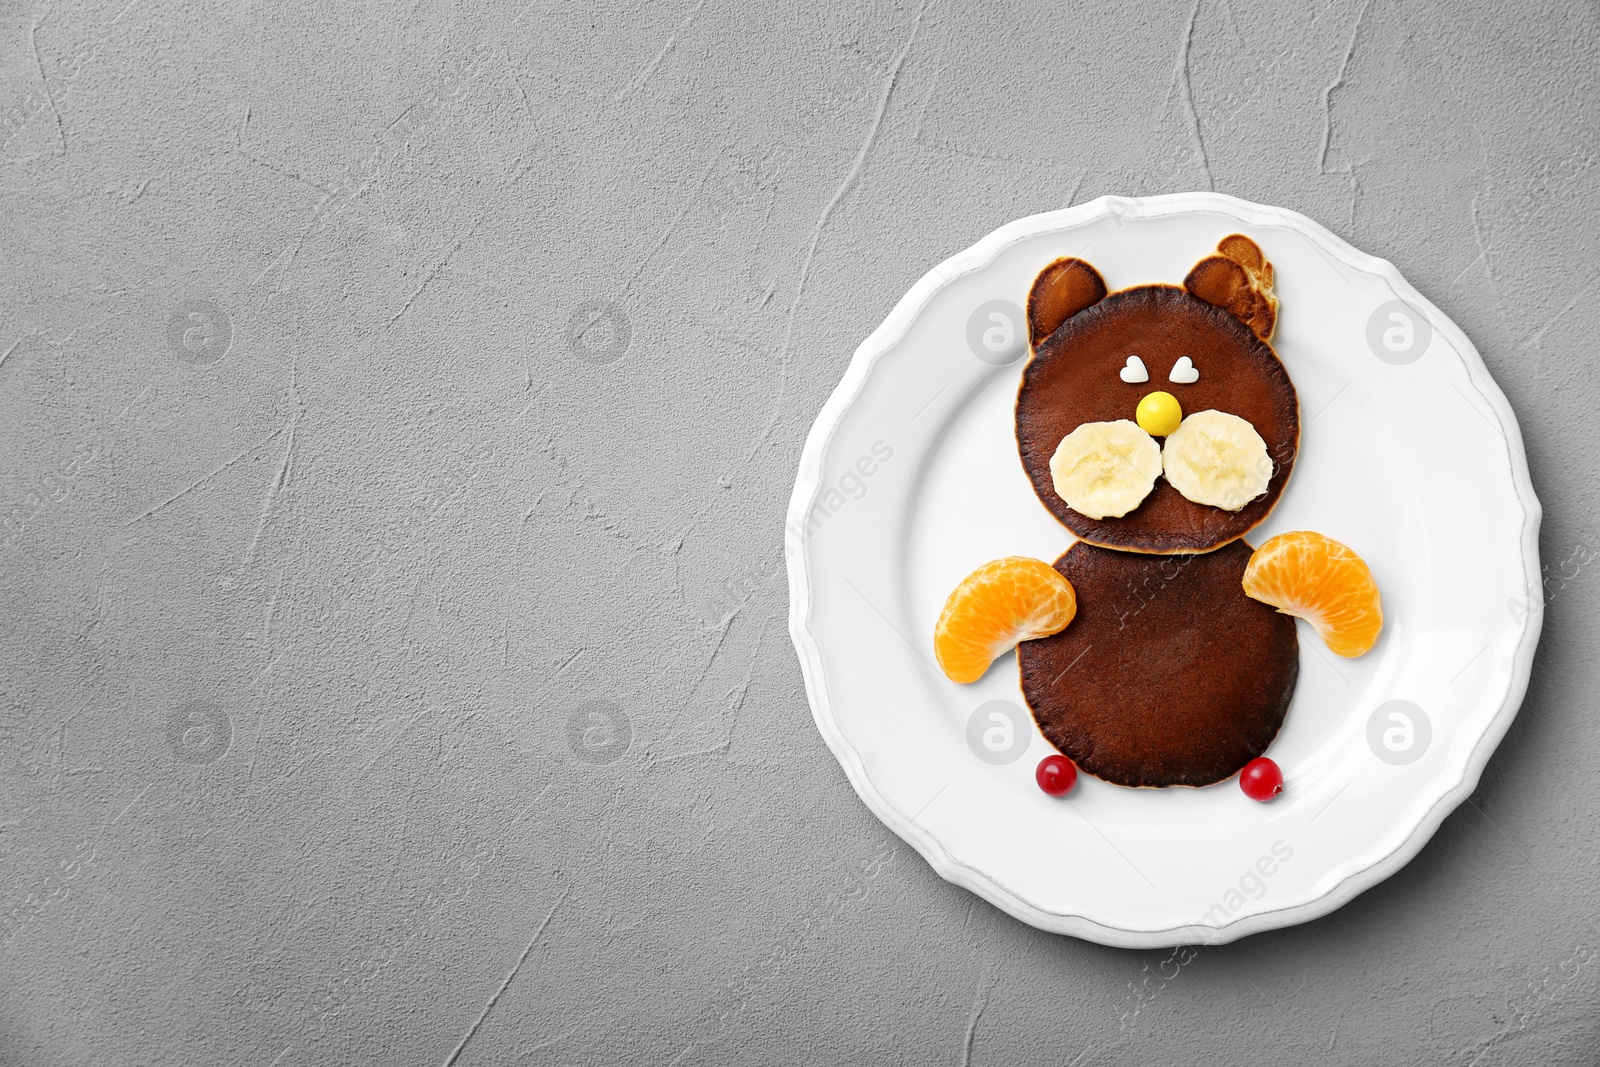 Photo of Plate with chocolate pancakes in form of cat on grey background. Creative breakfast ideas for kids